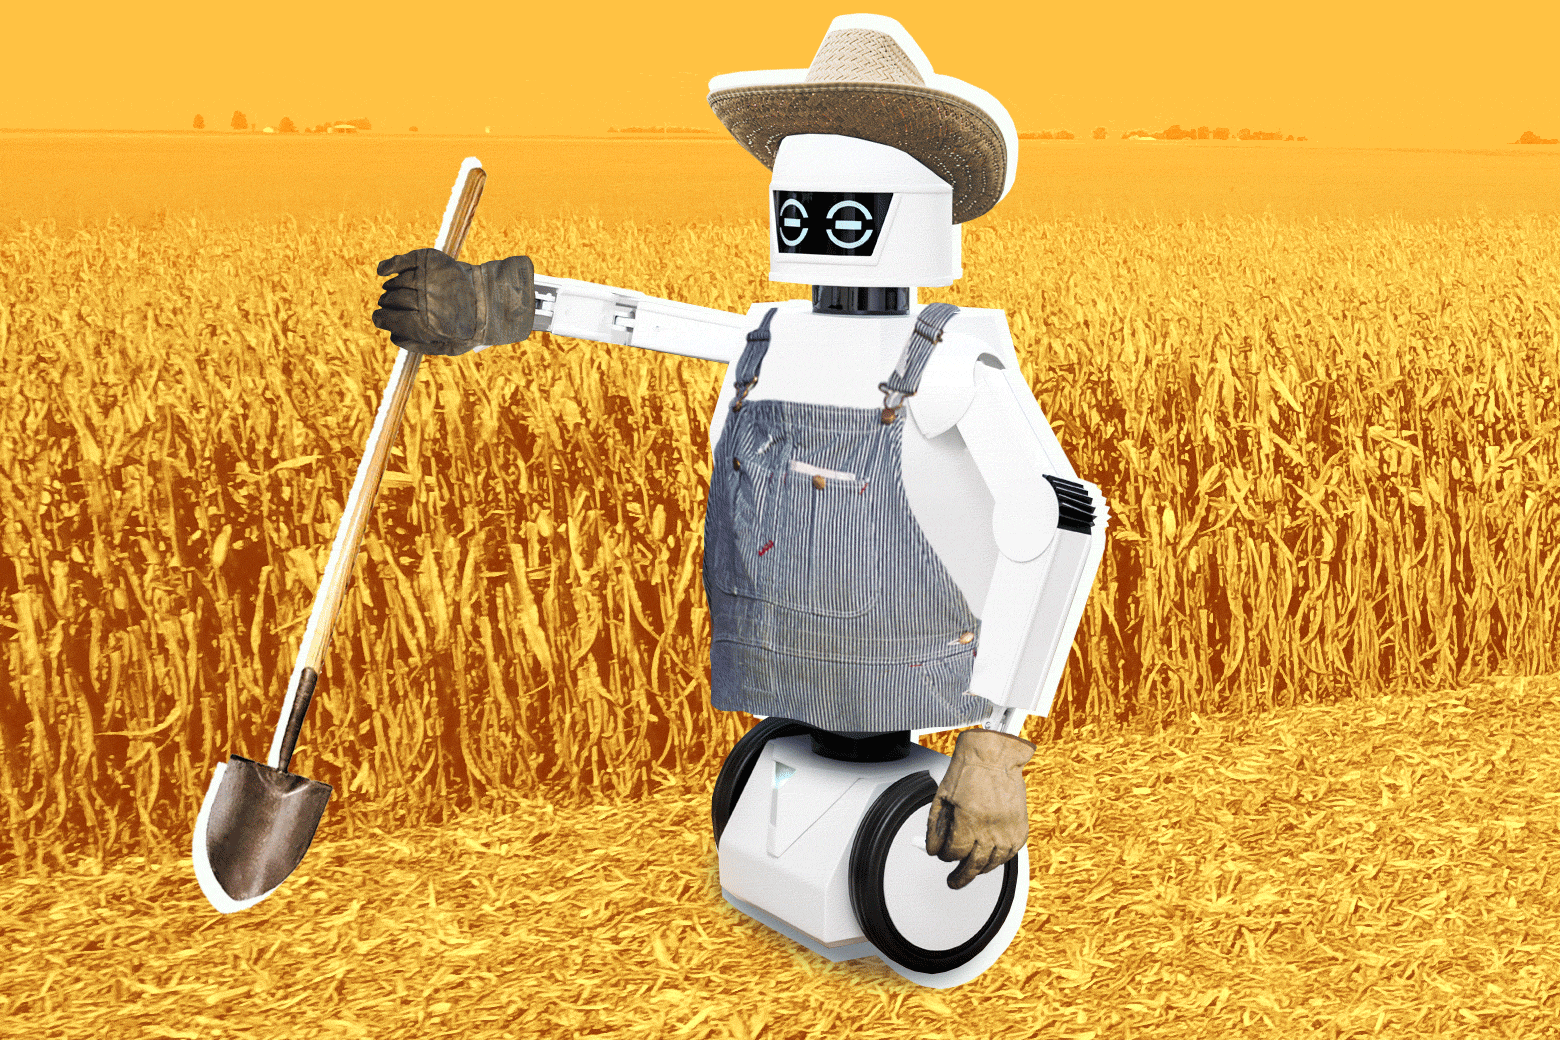 history of automation in agriculture